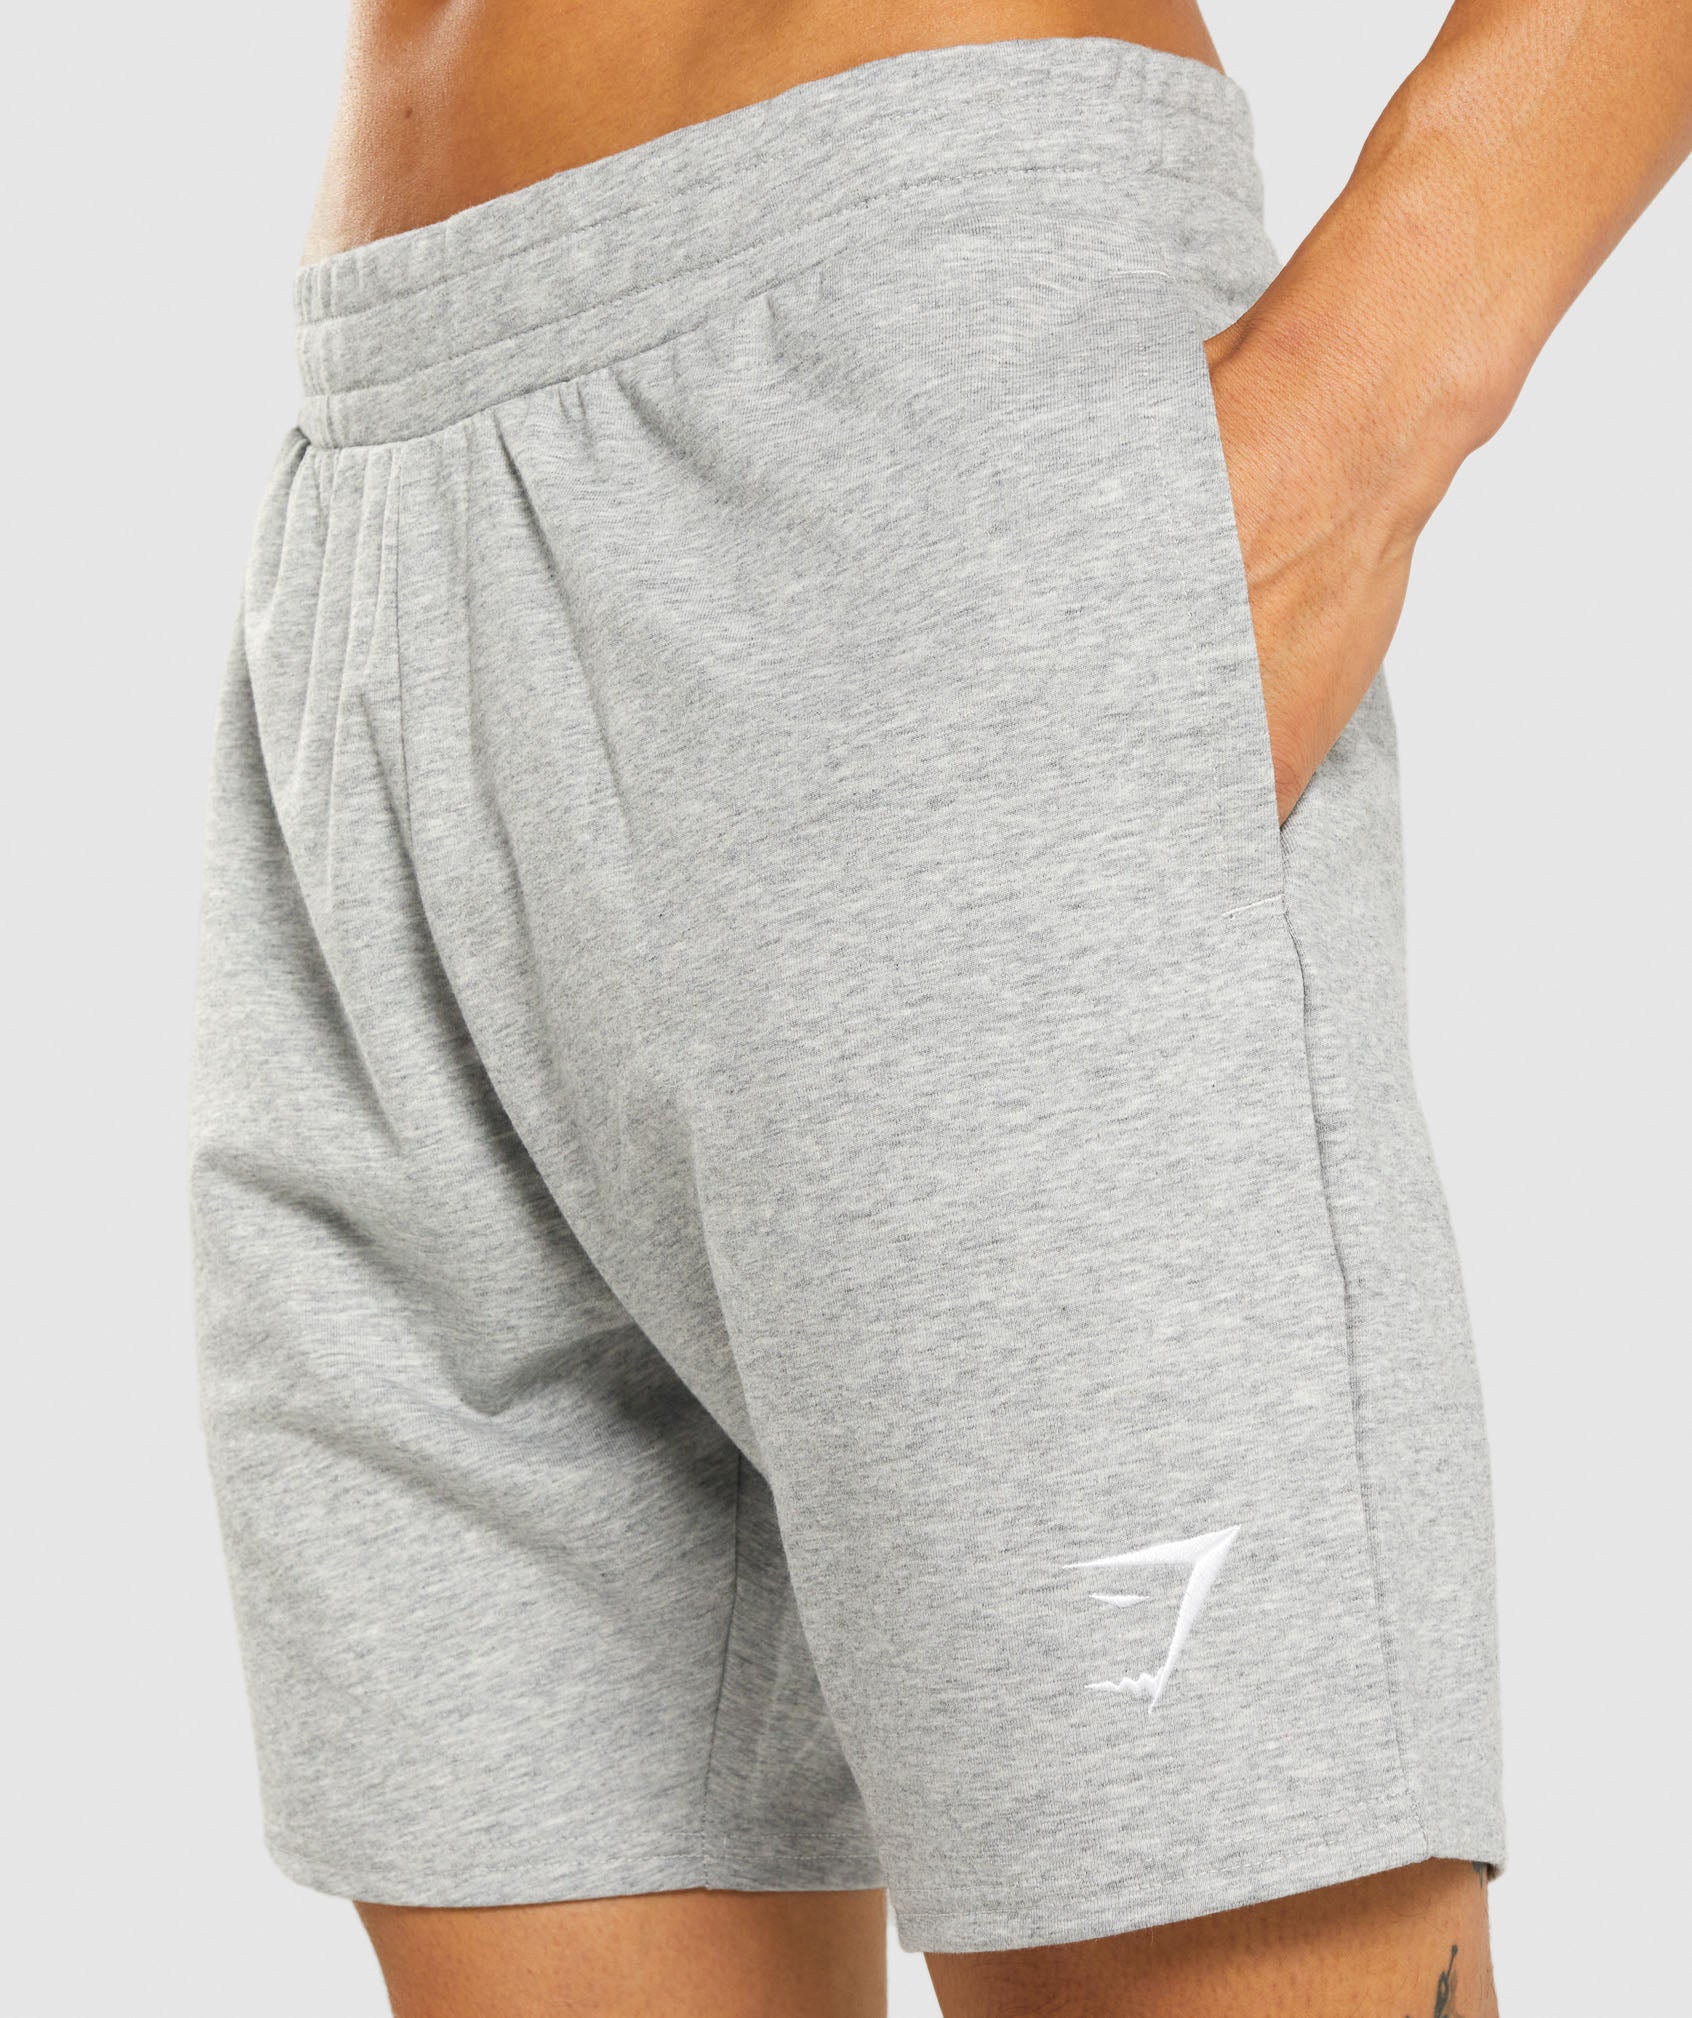 Essential 7” Shorts in Light Grey Marl - view 5